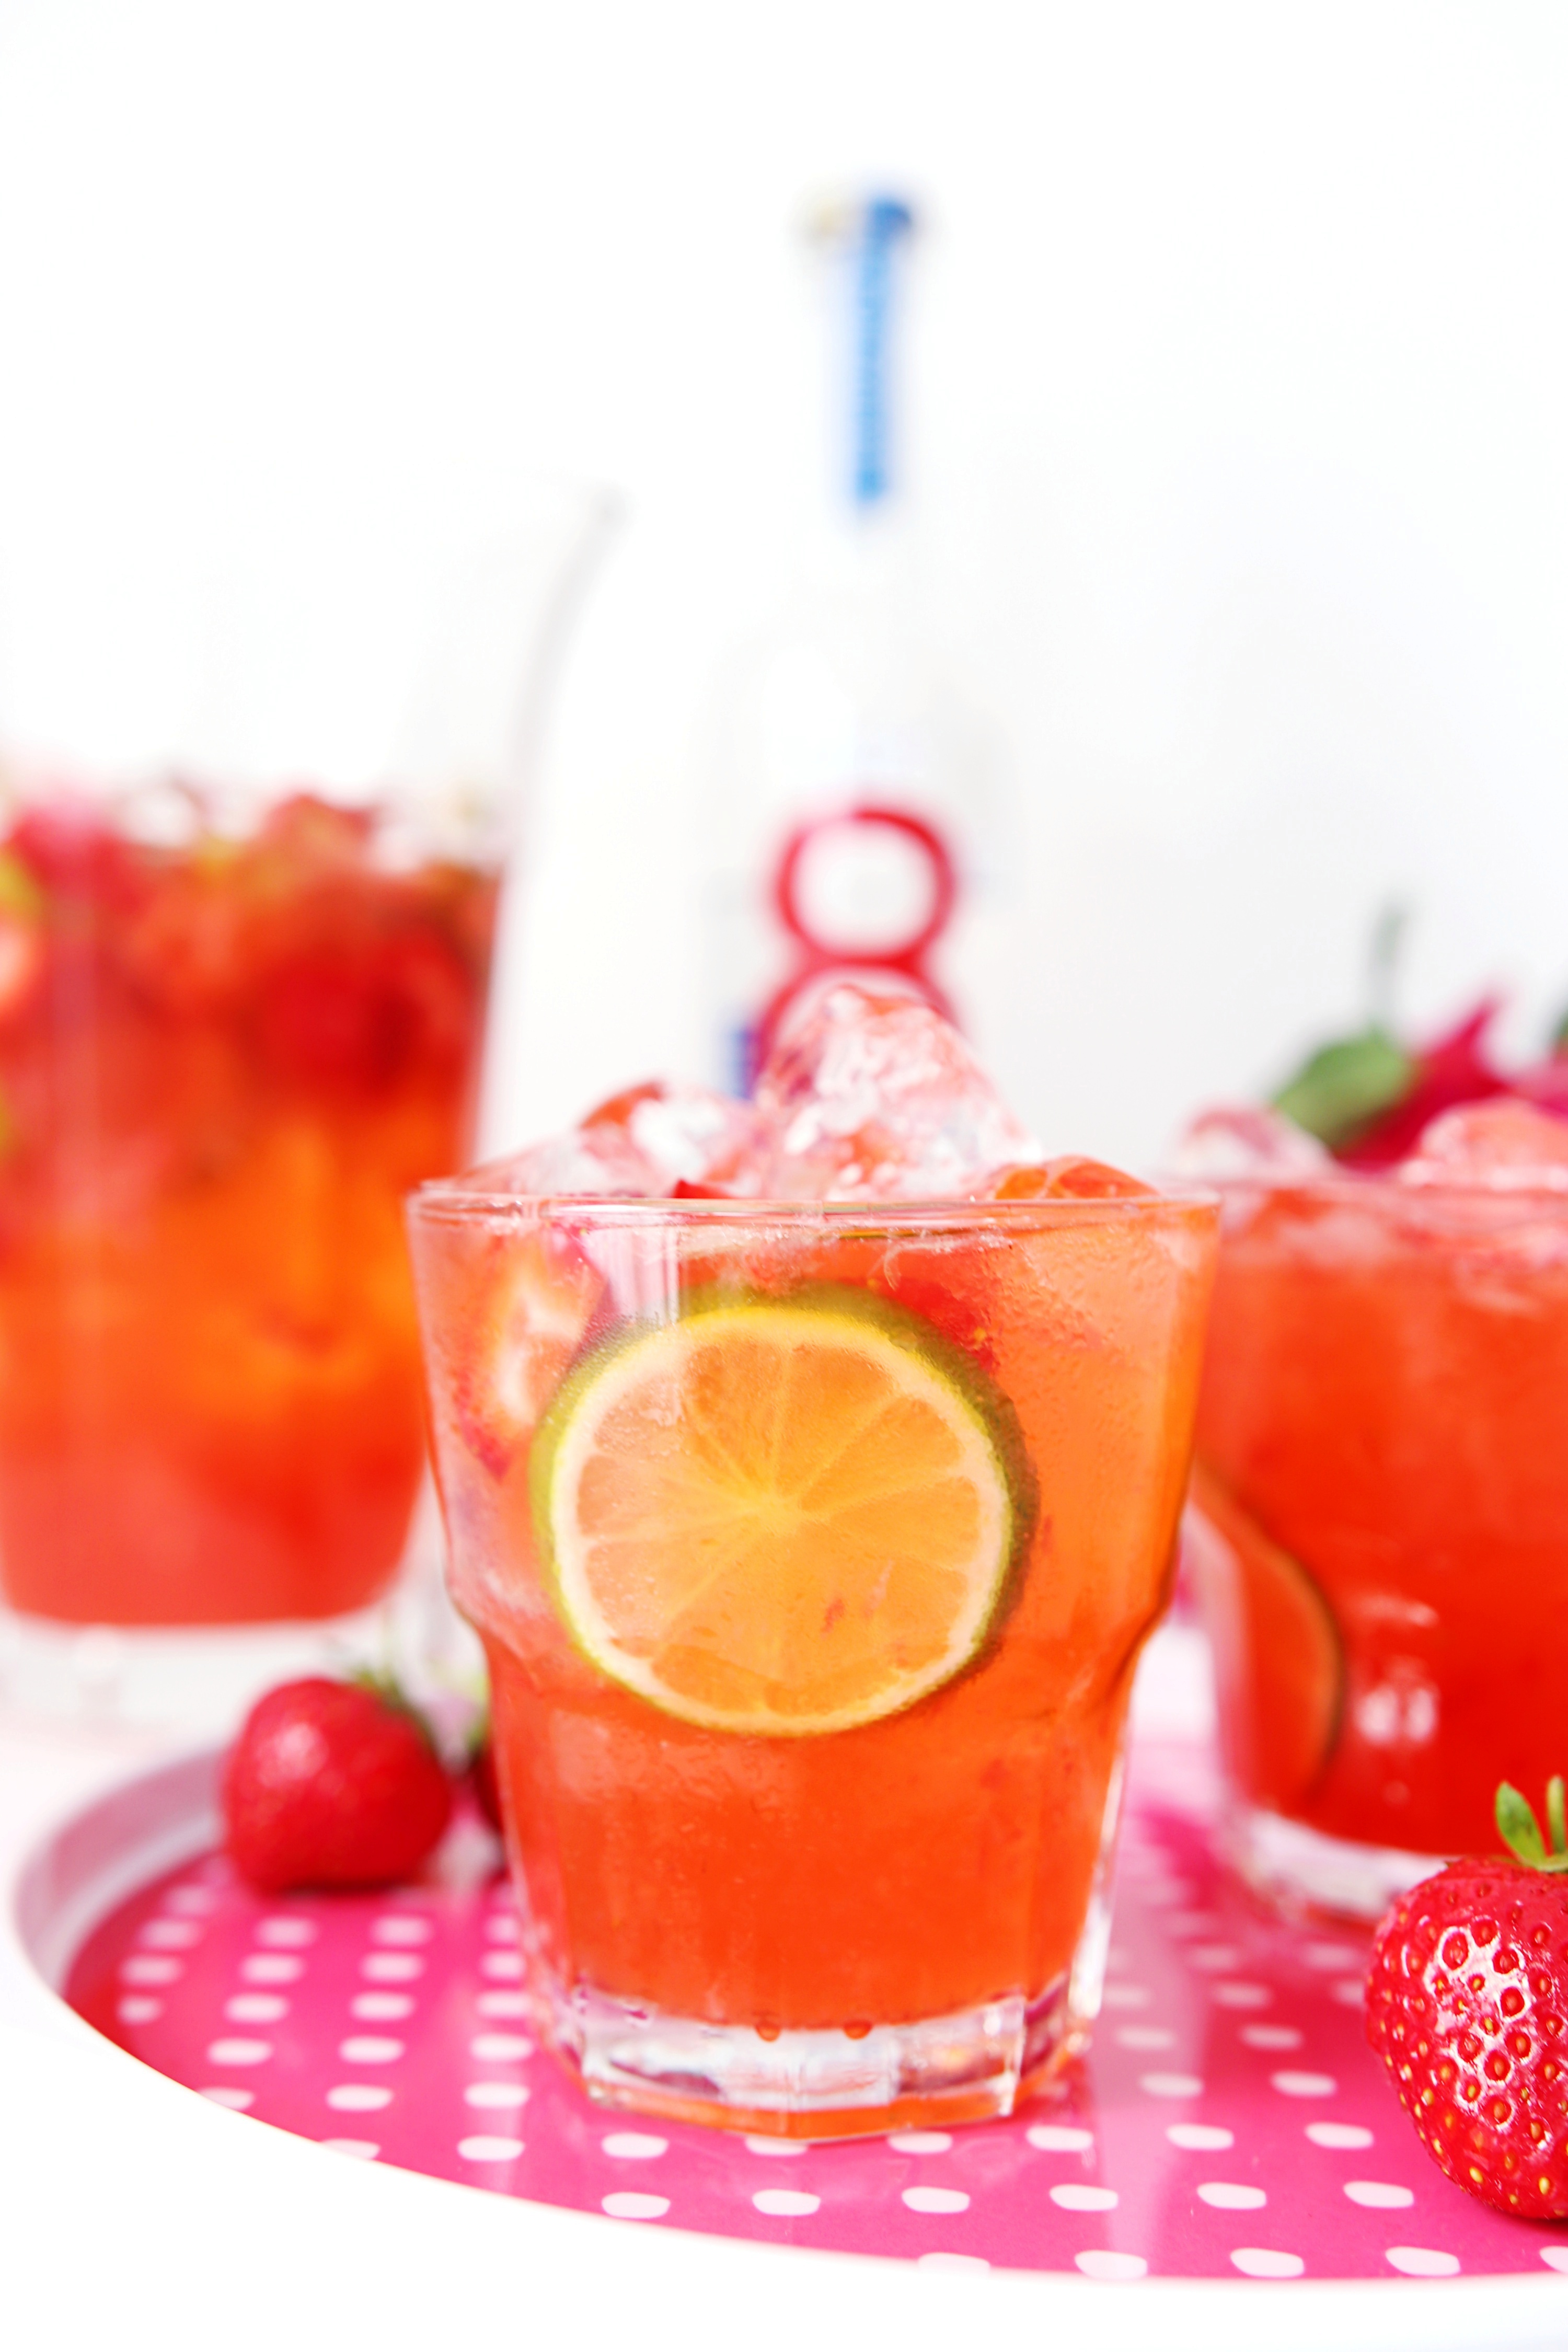 Strawberry Tequila Refresher Cocktail - Tequila Cocktail Recipe